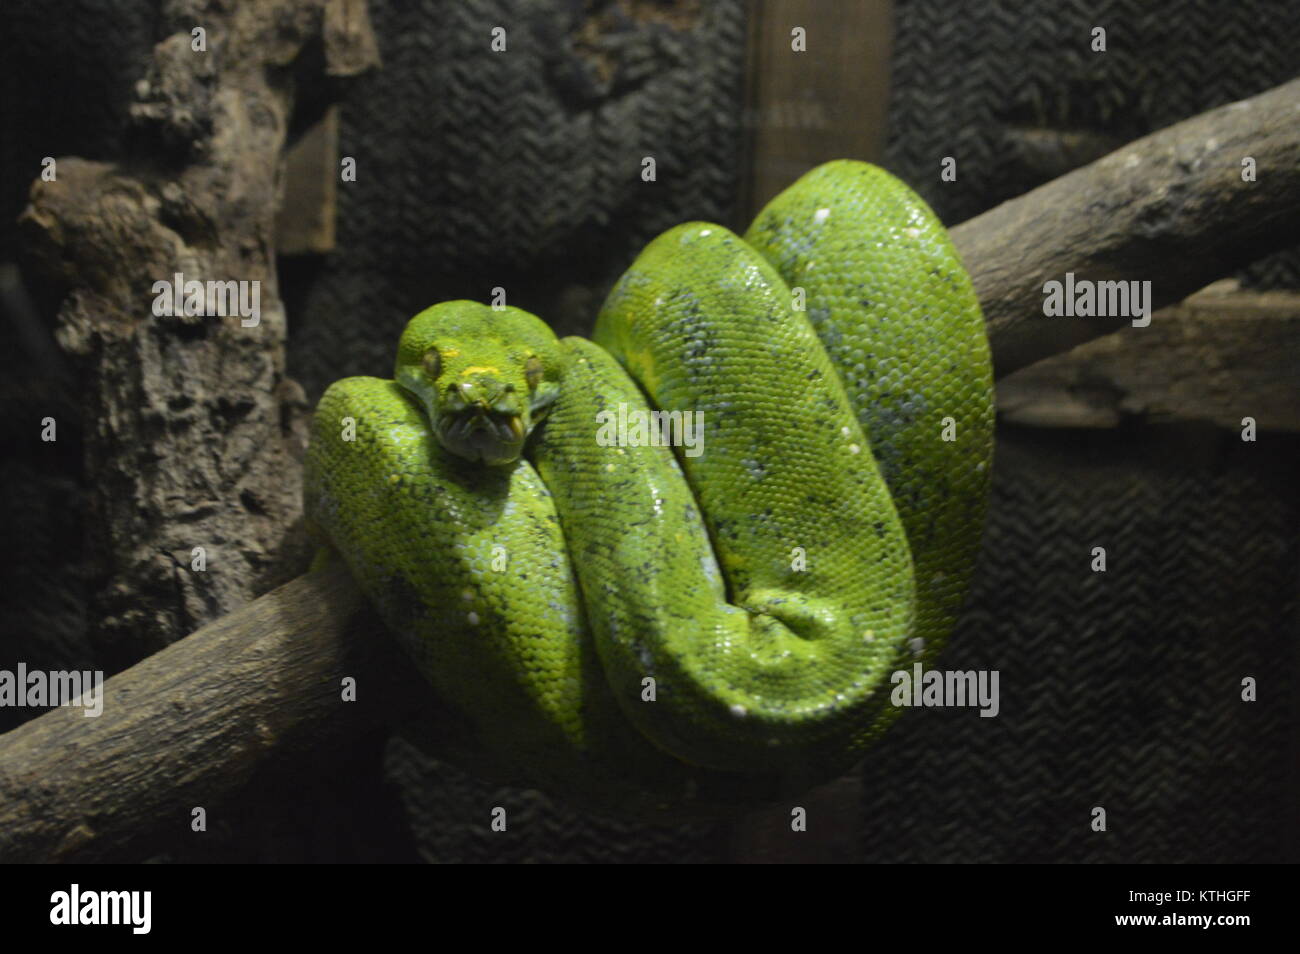 toxic smooth green snake curled up on branch. Stock Photo